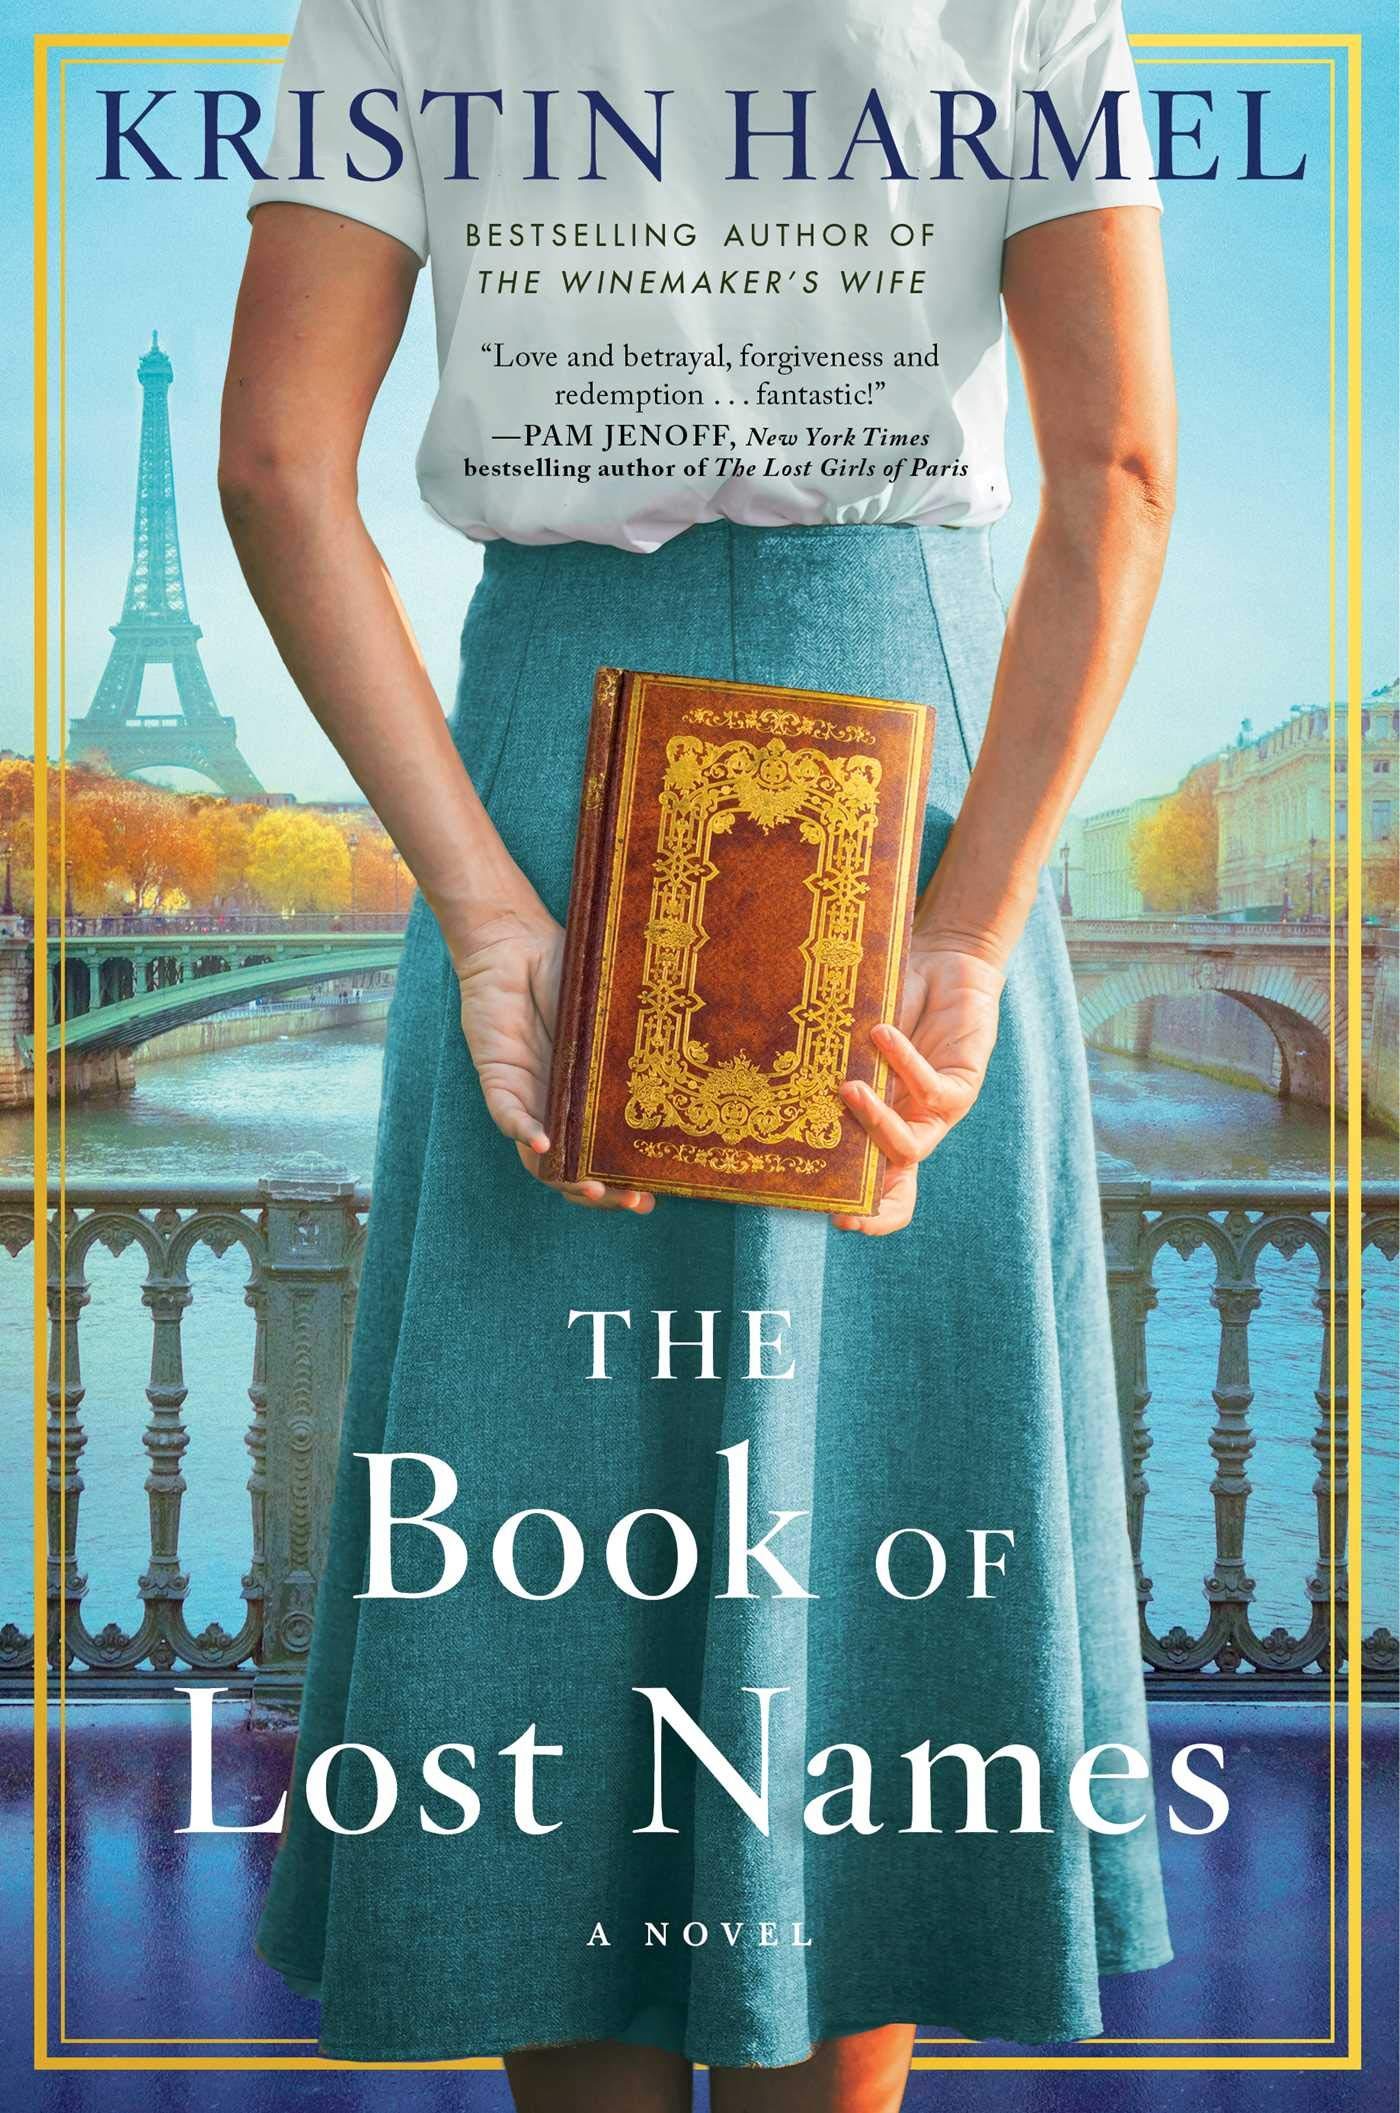 When Will The Book Of Lost Names By Kristin Harmel Release? 2020 Historical Fiction Releases